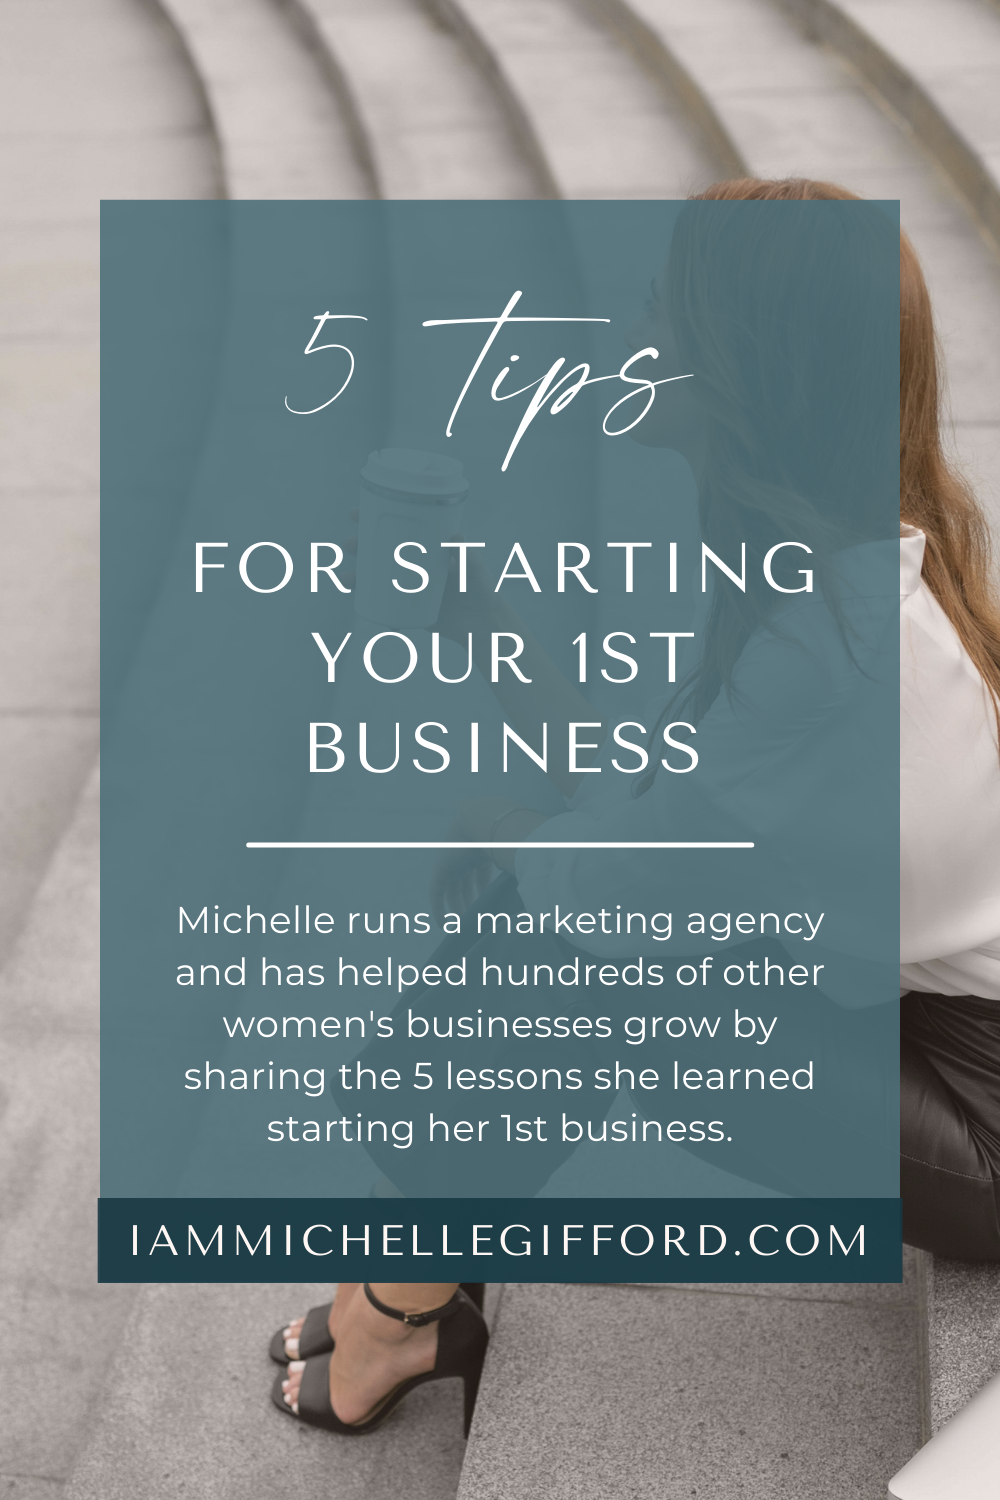 5 tips for starting your first business iammichellegifford.com.